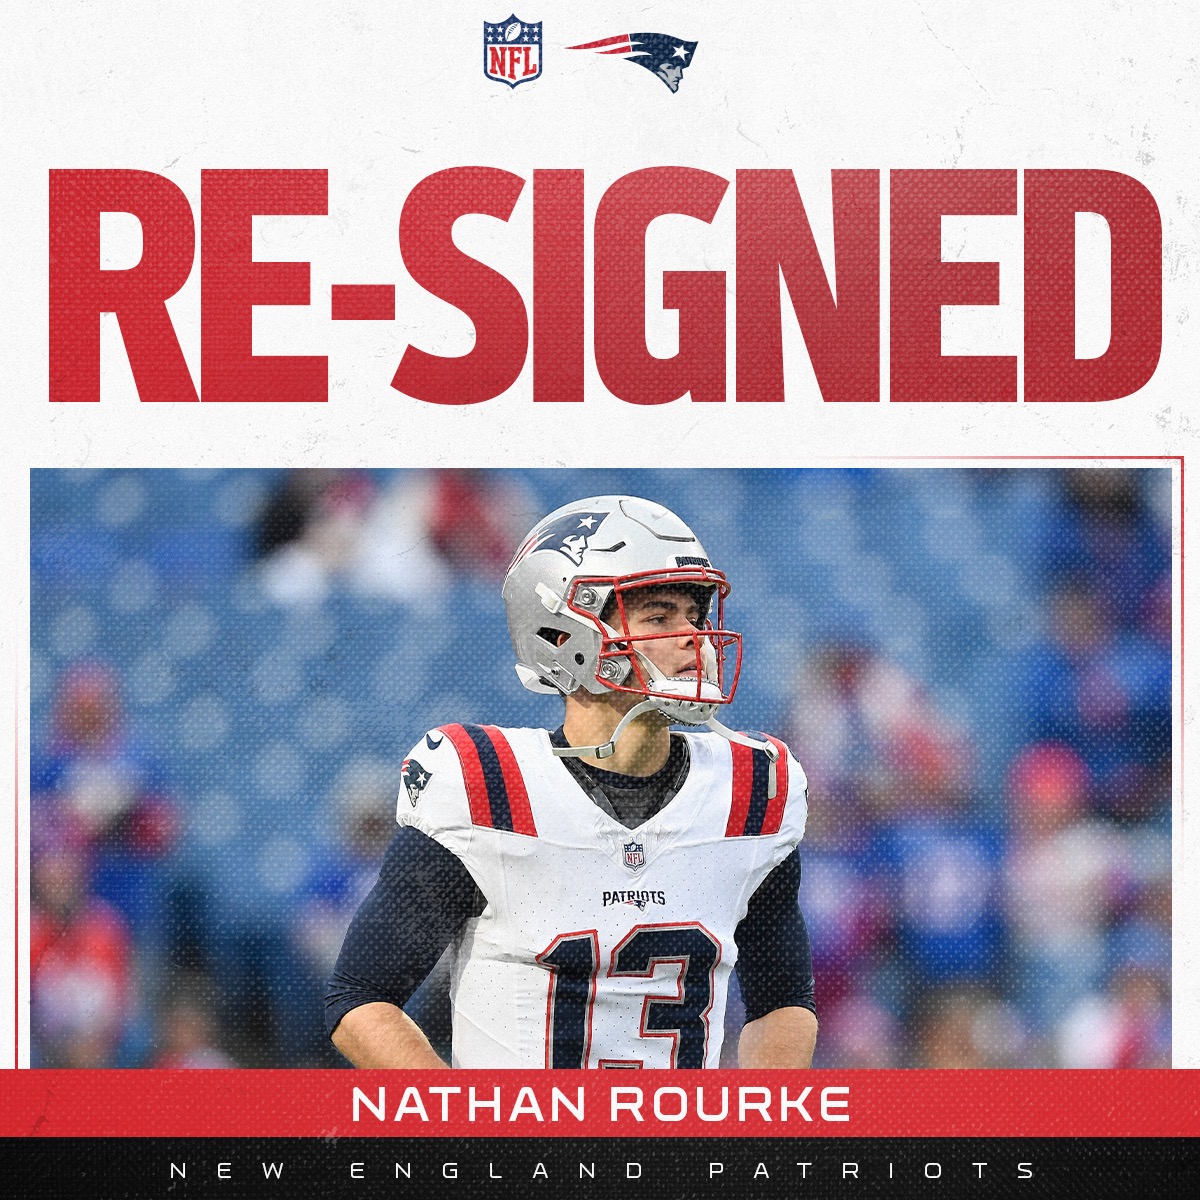 The Patriots have re-signed Nathan Rourke to a one year contract, per @TomPelissero. ✍️